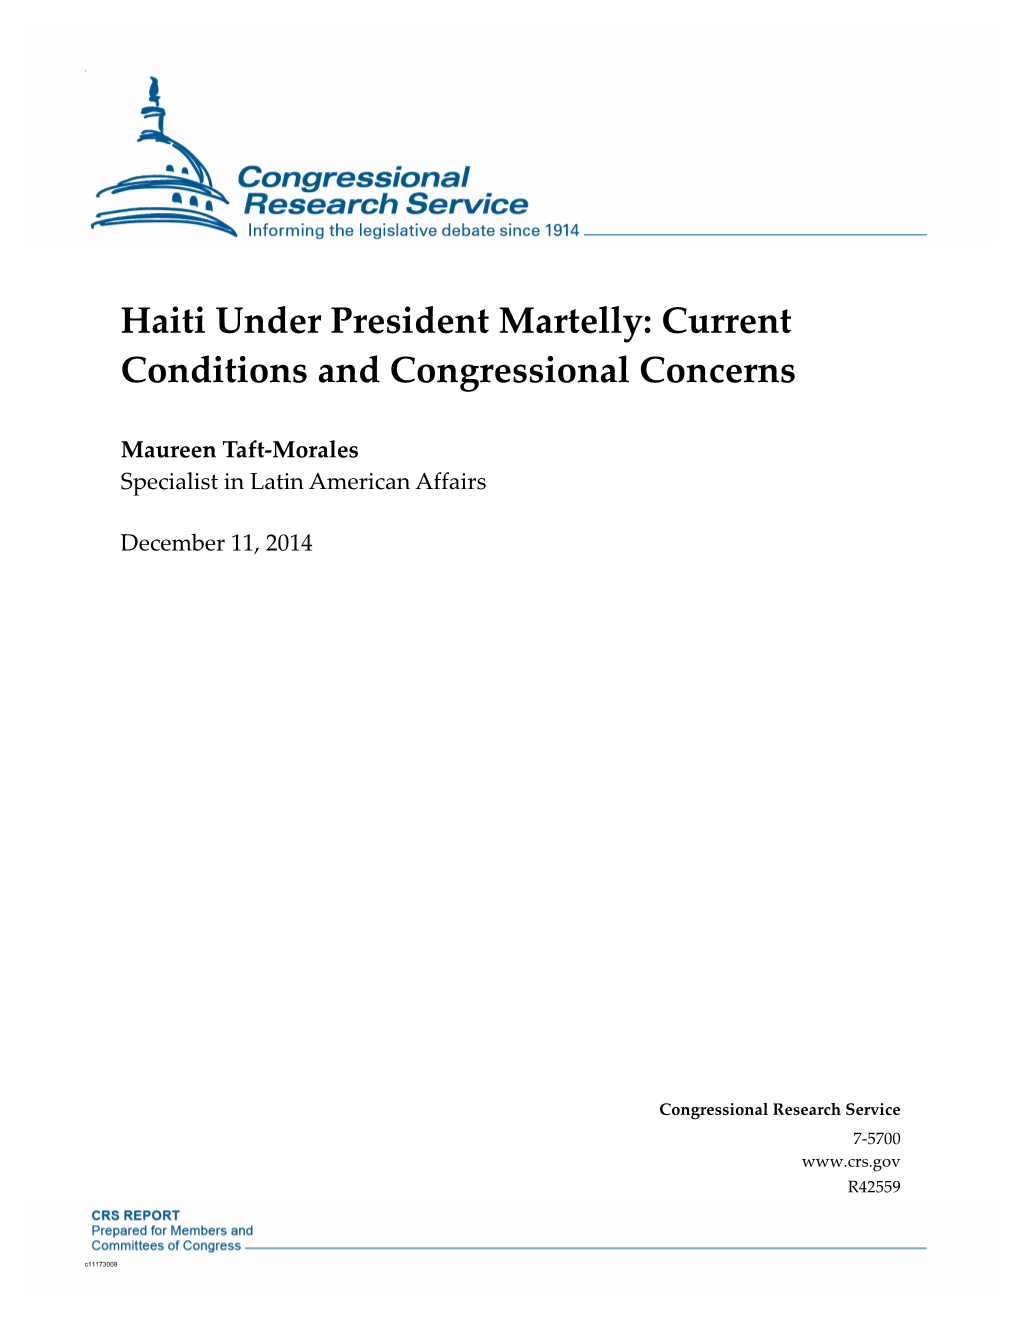 Haiti Under President Martelly: Current Conditions and Congressional Concerns